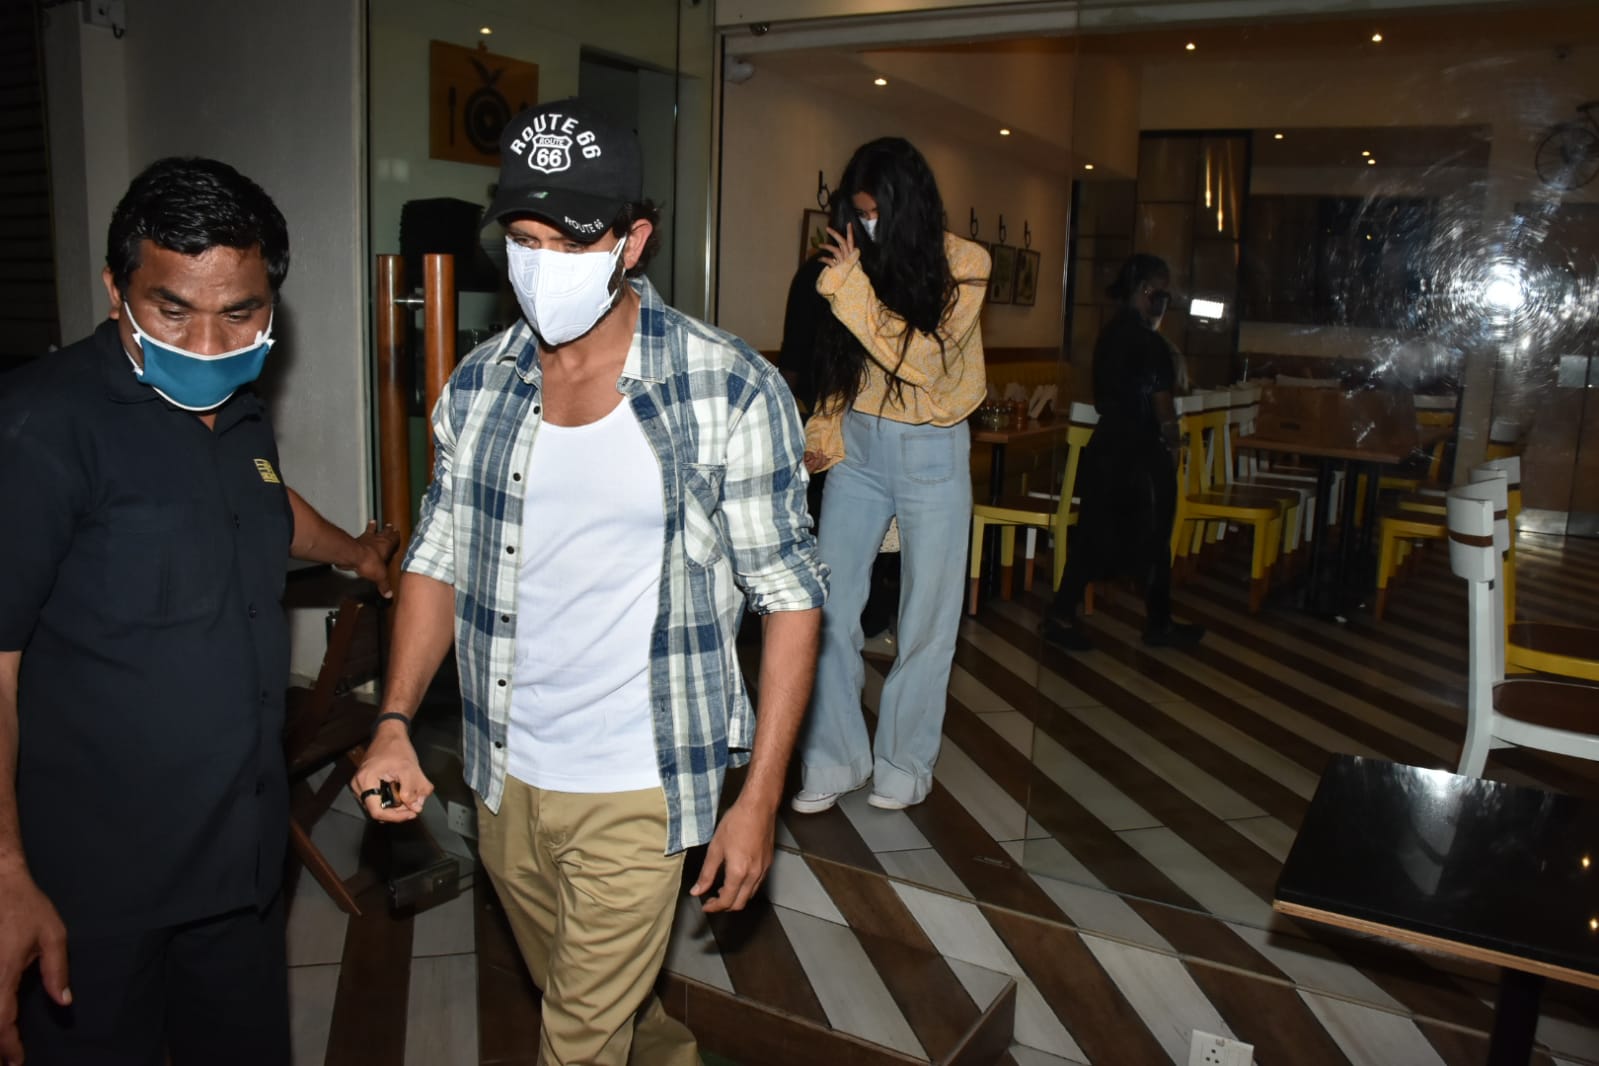 Hrithik Roshan And Saba Azad in Mumbai After Dinner Date | PC: Viral Bhayani